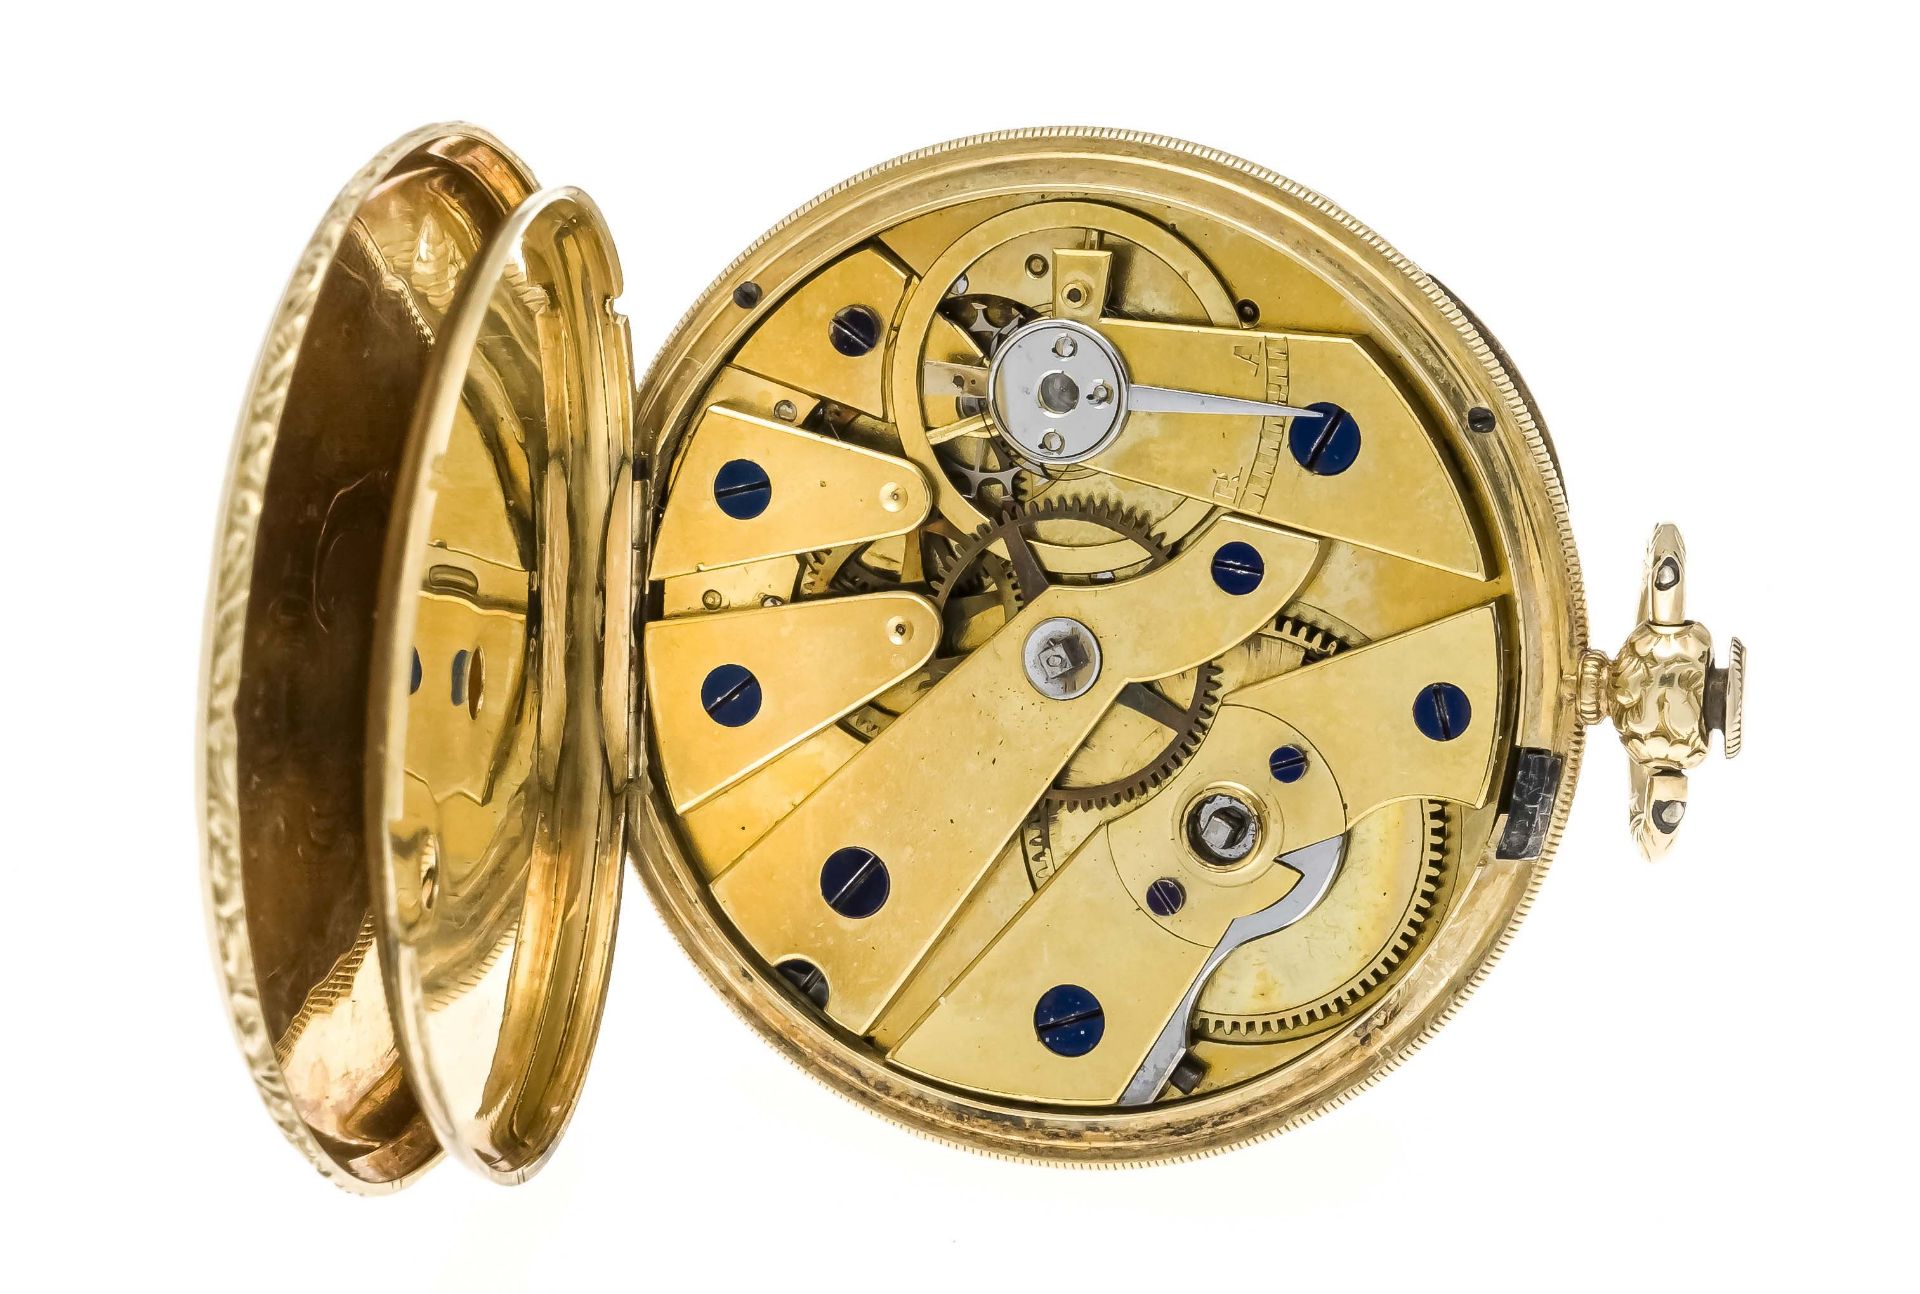 open tailcoat watch with spring cover for the back, 750/000 GG unstamped but tested, 2 gold - Image 5 of 6